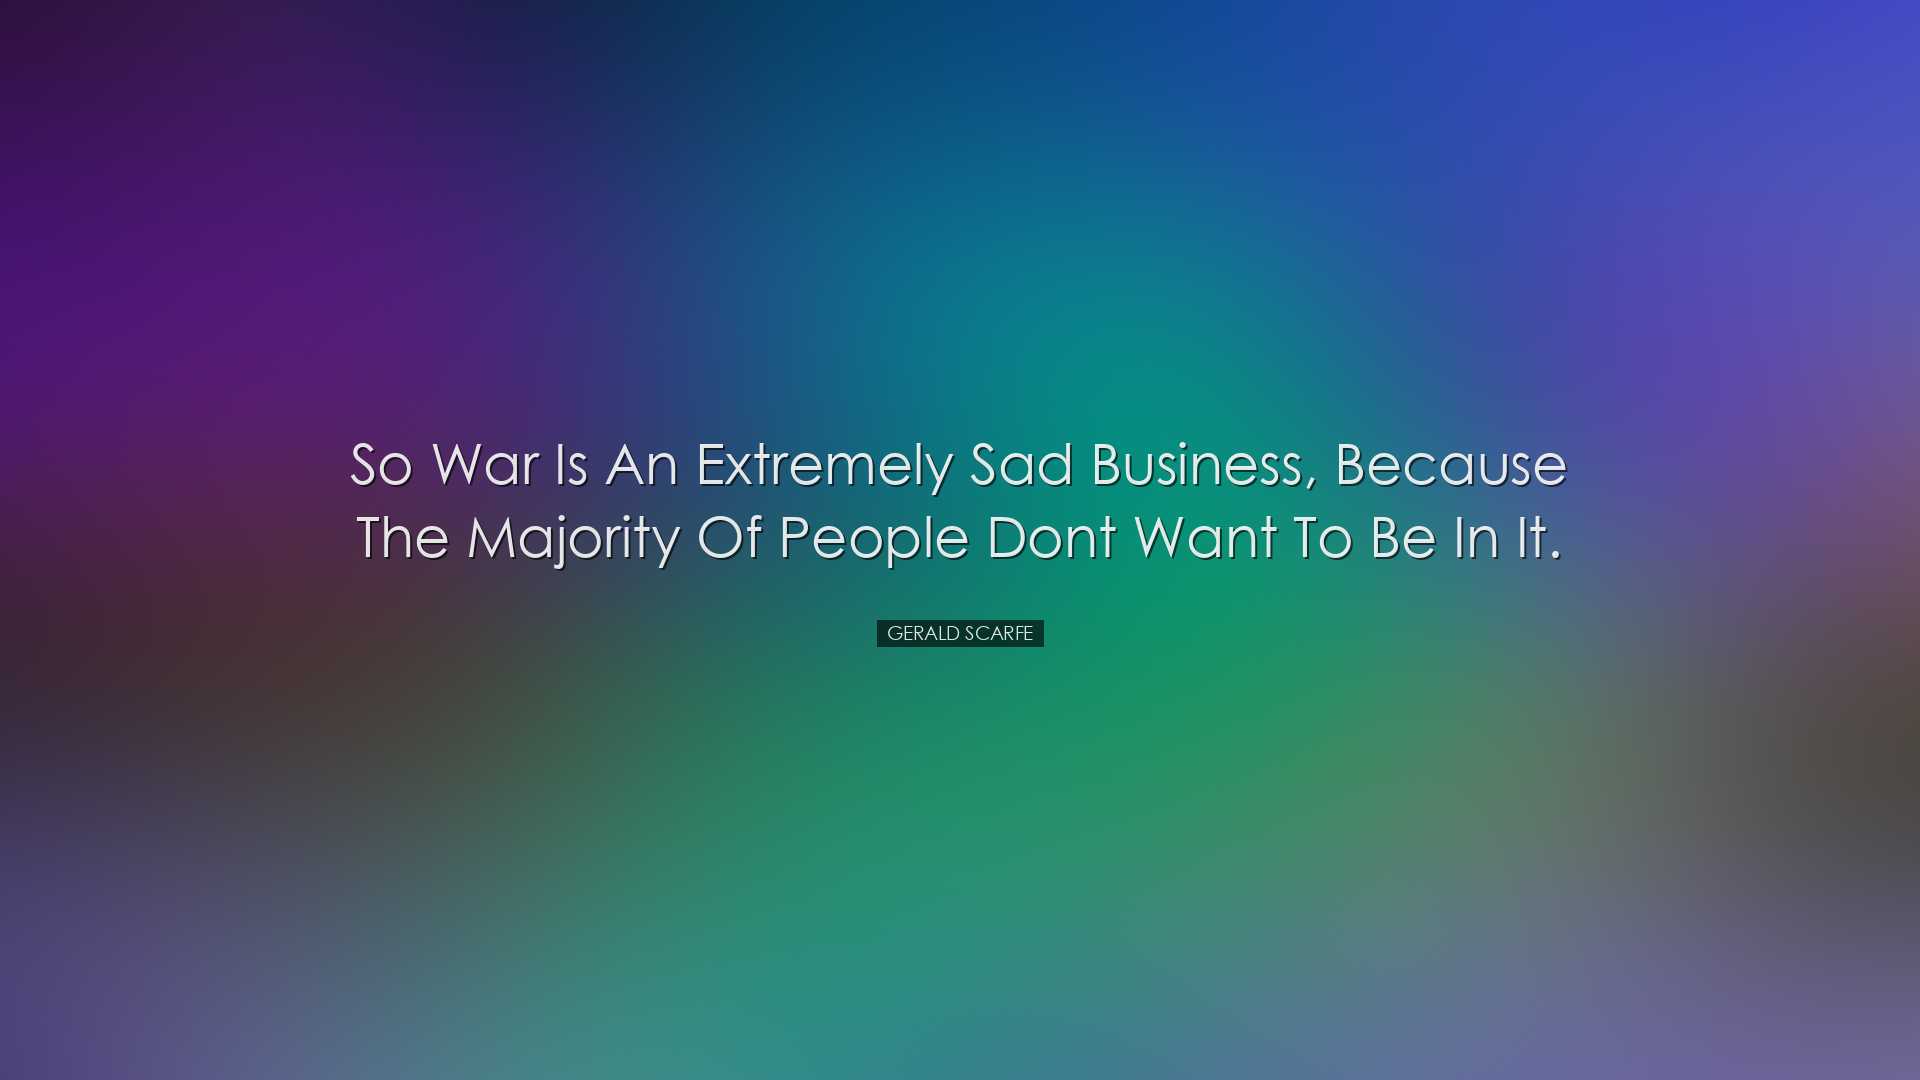 So war is an extremely sad business, because the majority of peopl